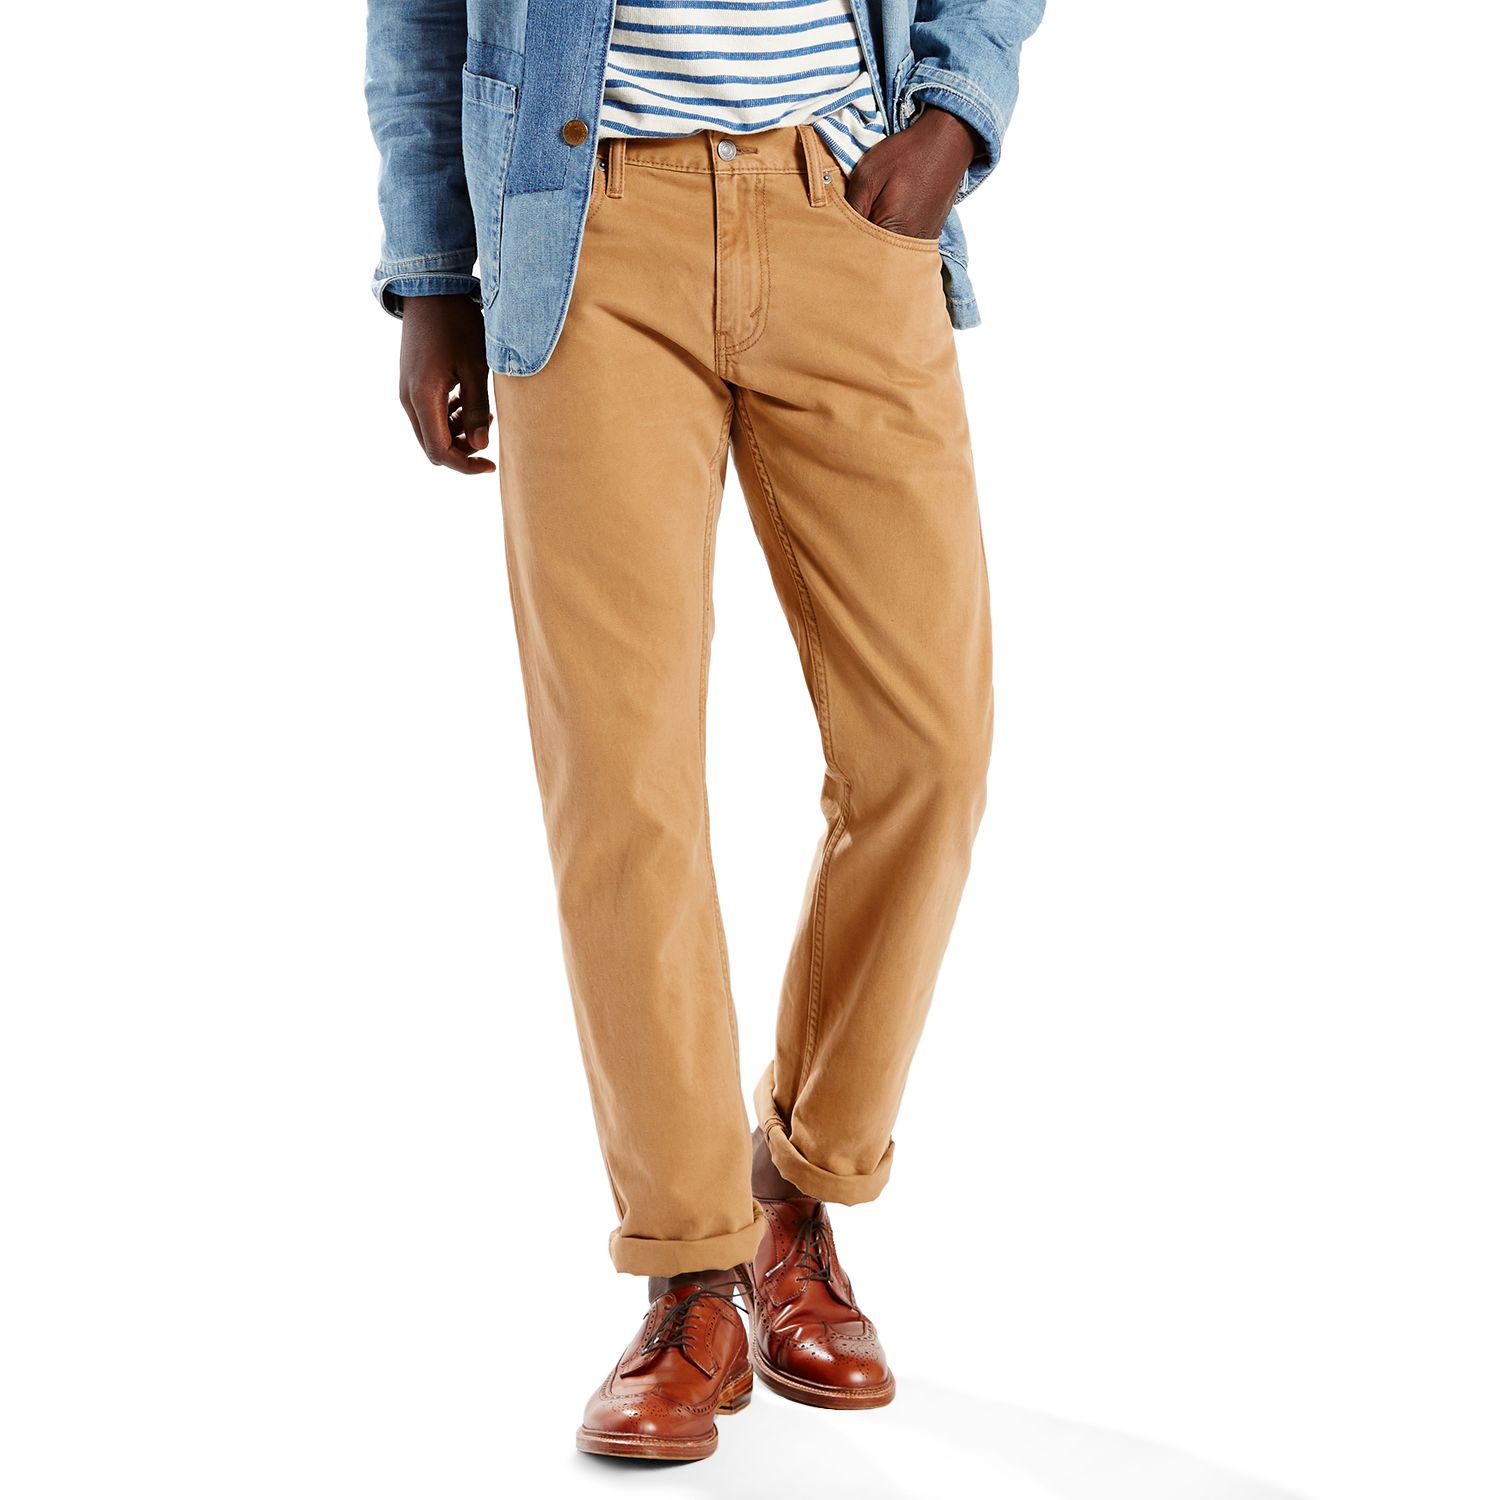 Image for Levi's Men's 514™ Straight Pants at Kohl's.